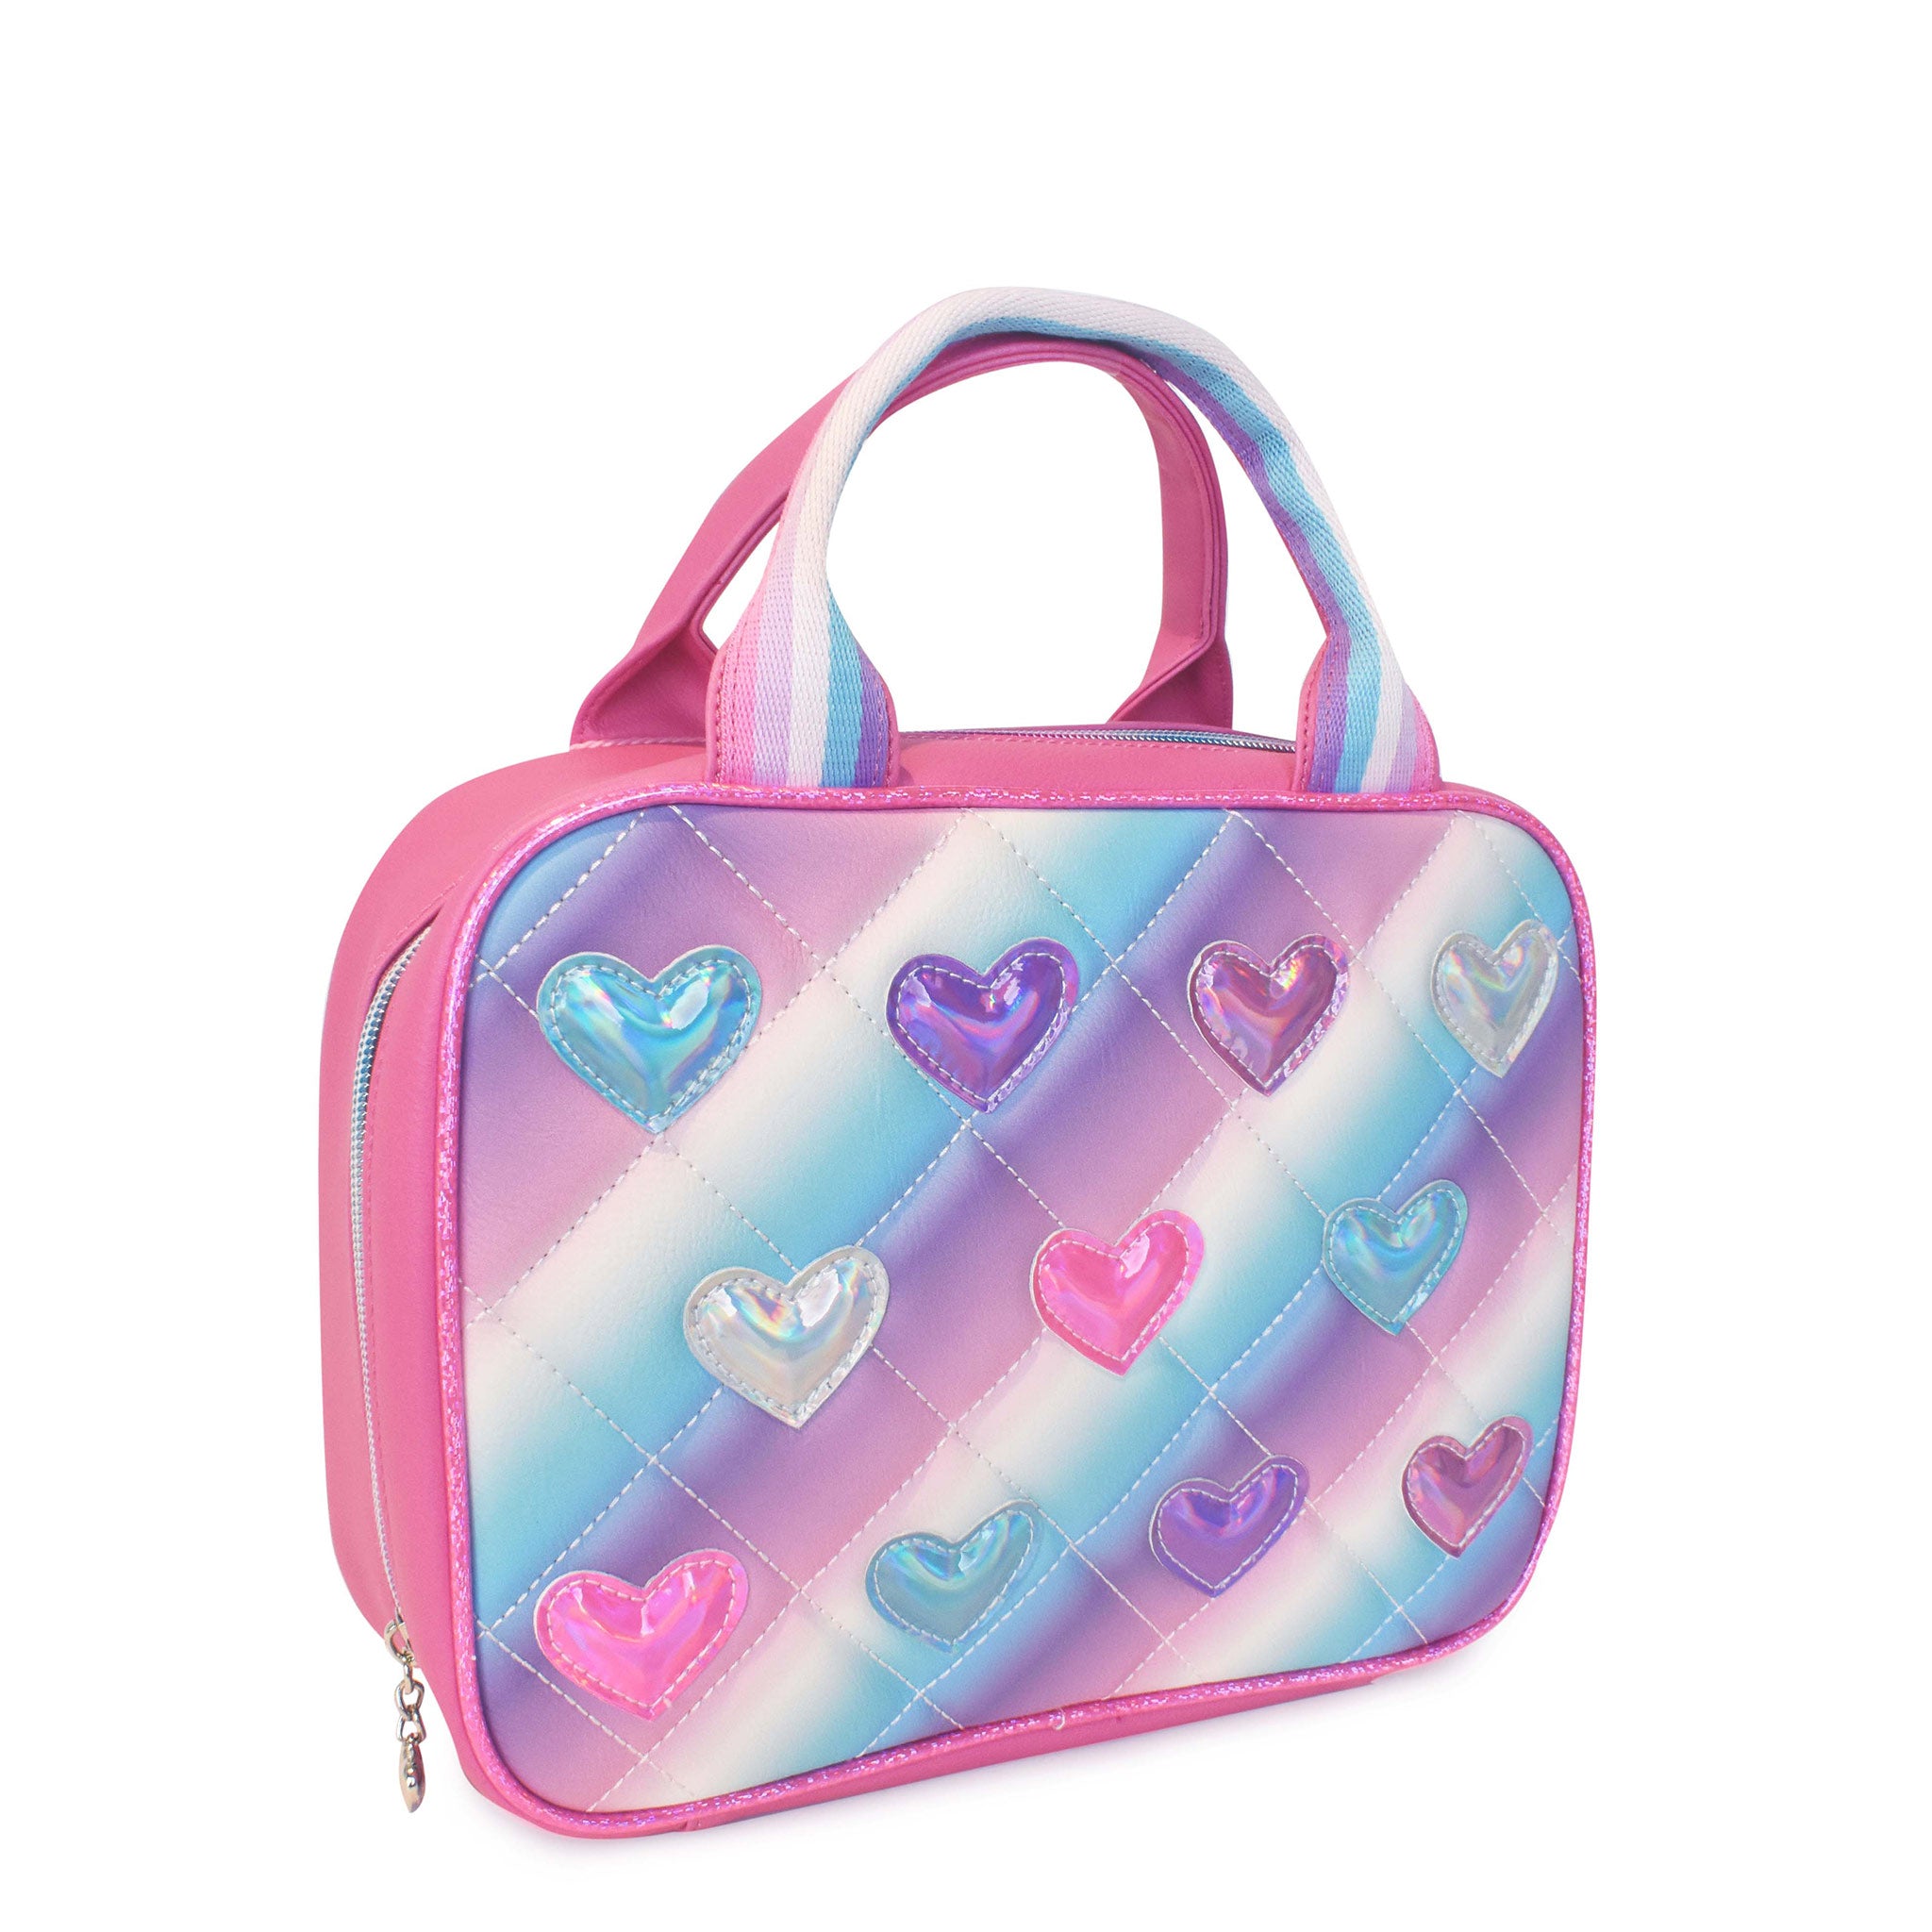 Side view of a metallic heart patched lunch bag quilted in a cool pastel ombre